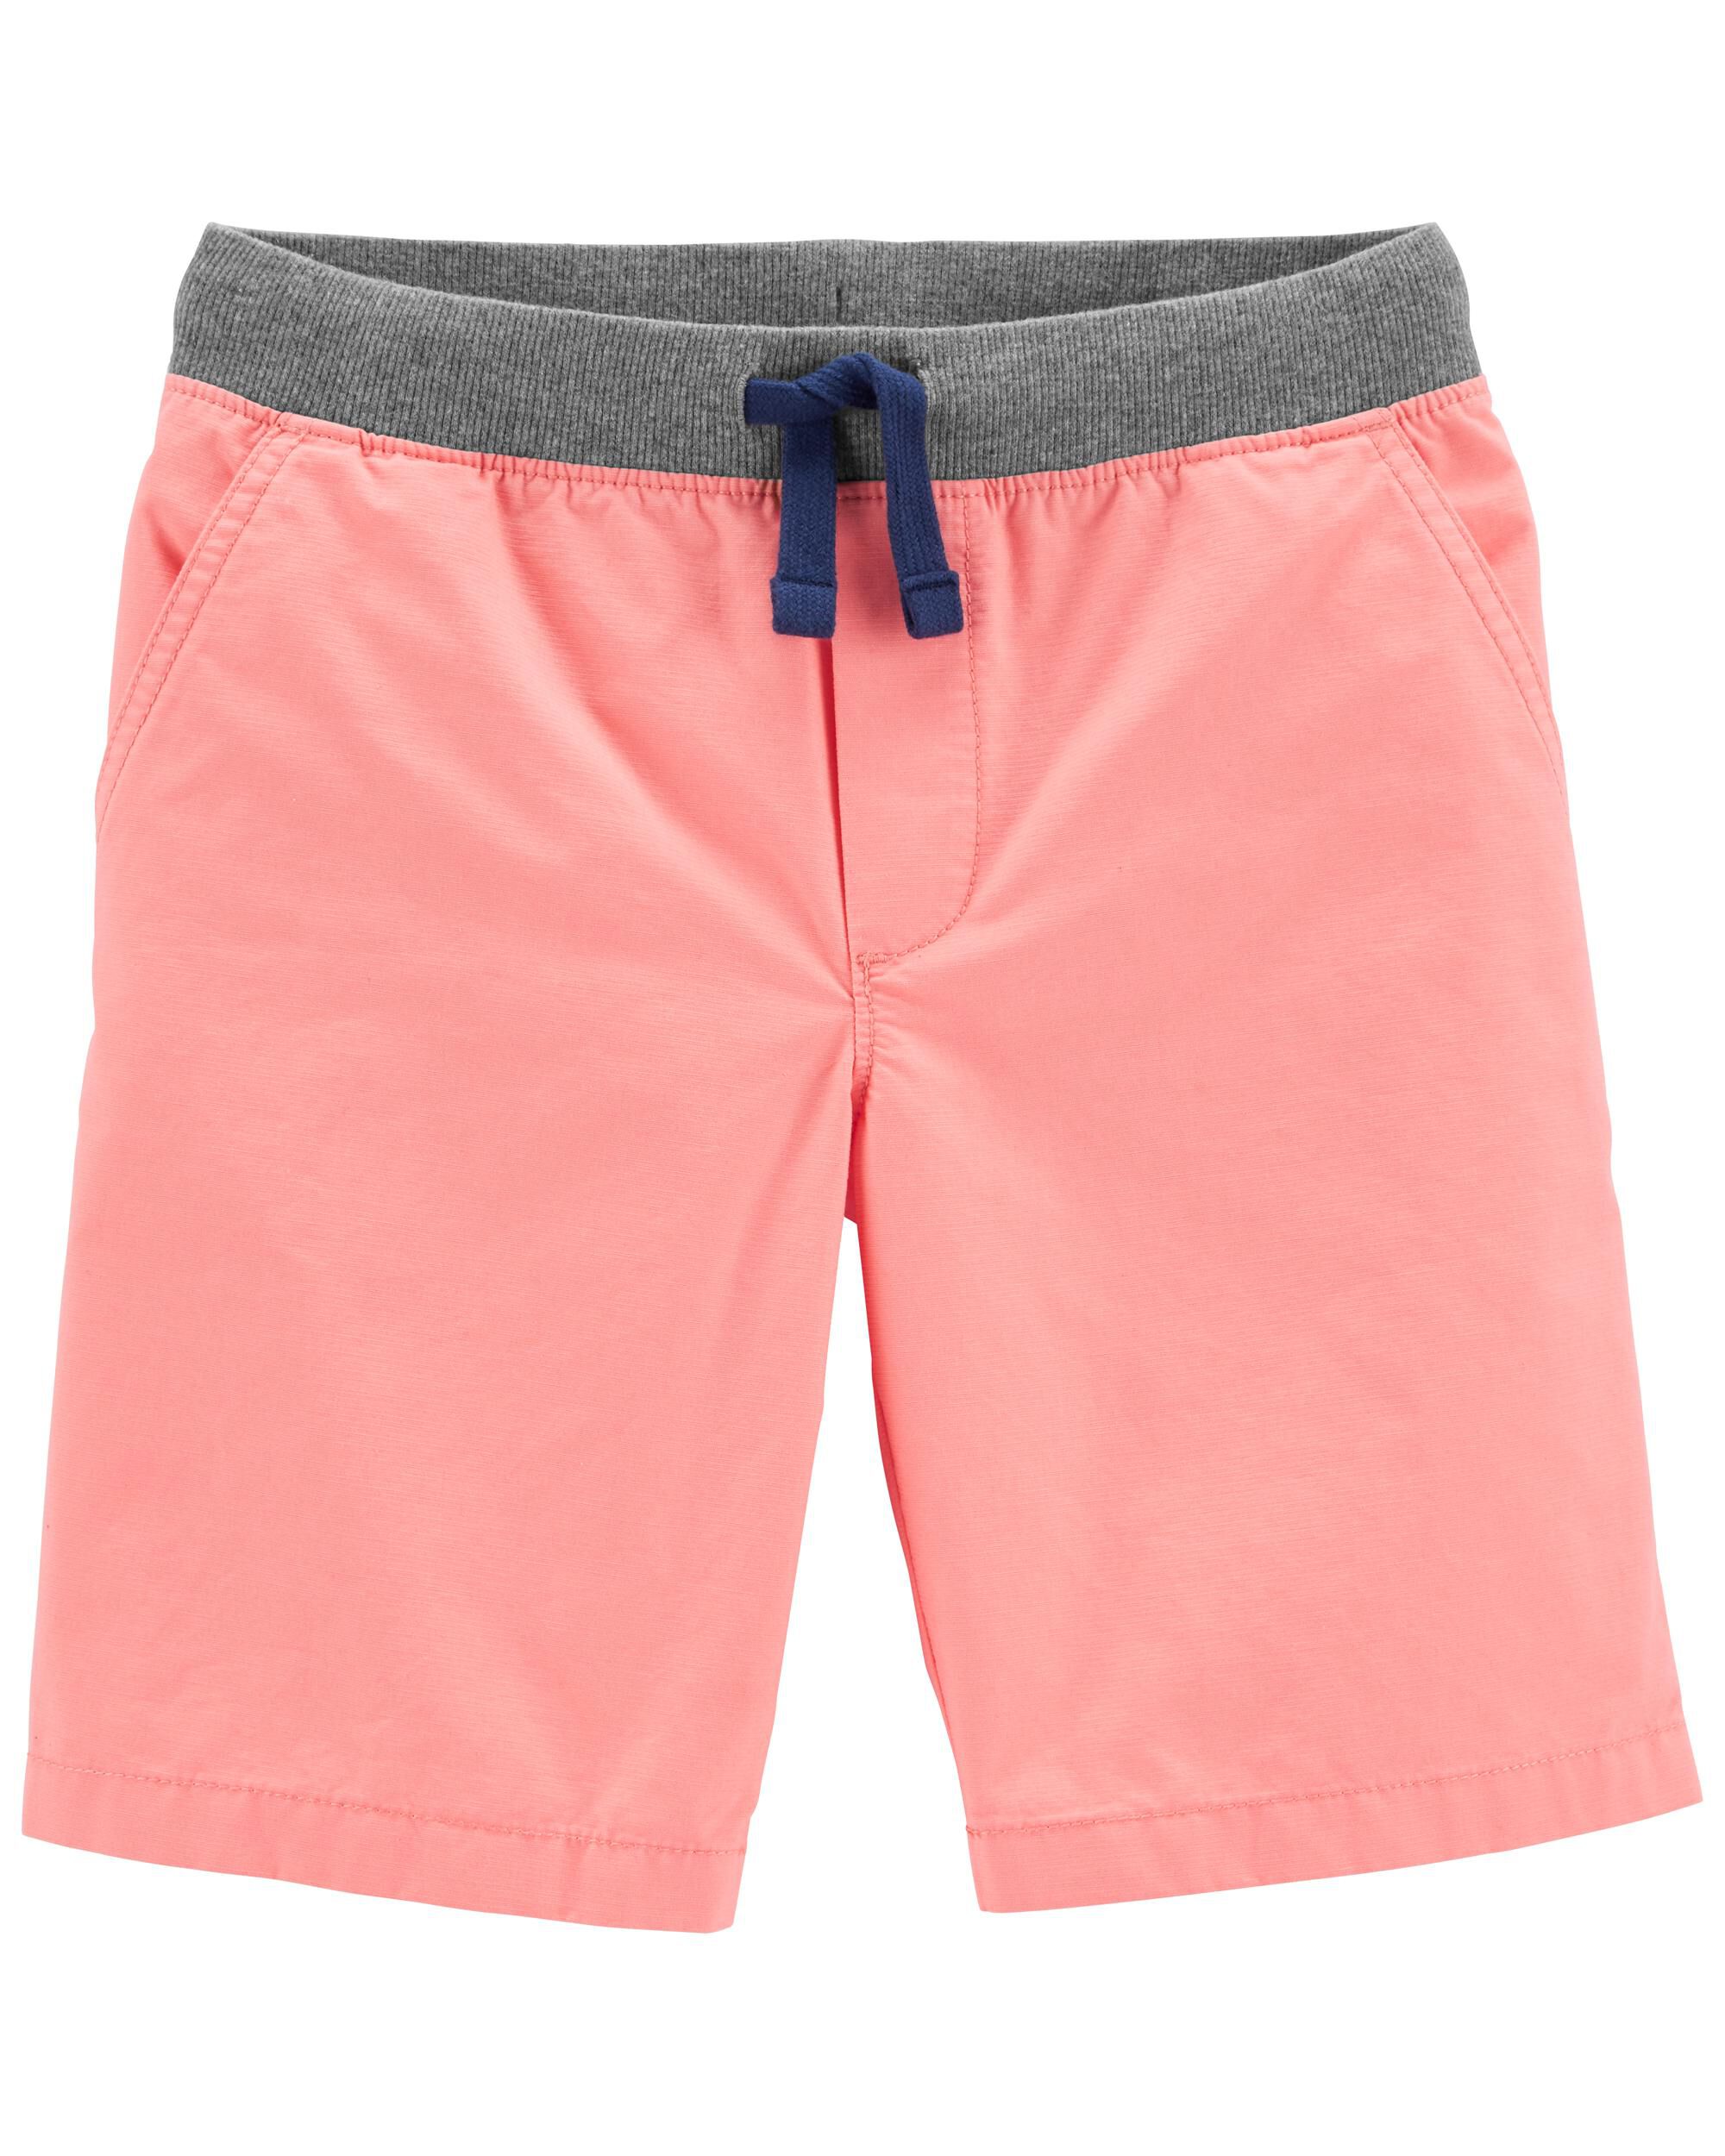 Carters Baby Girls Sparkle Side Stripe Neon French Terry Shorts Pink 6M